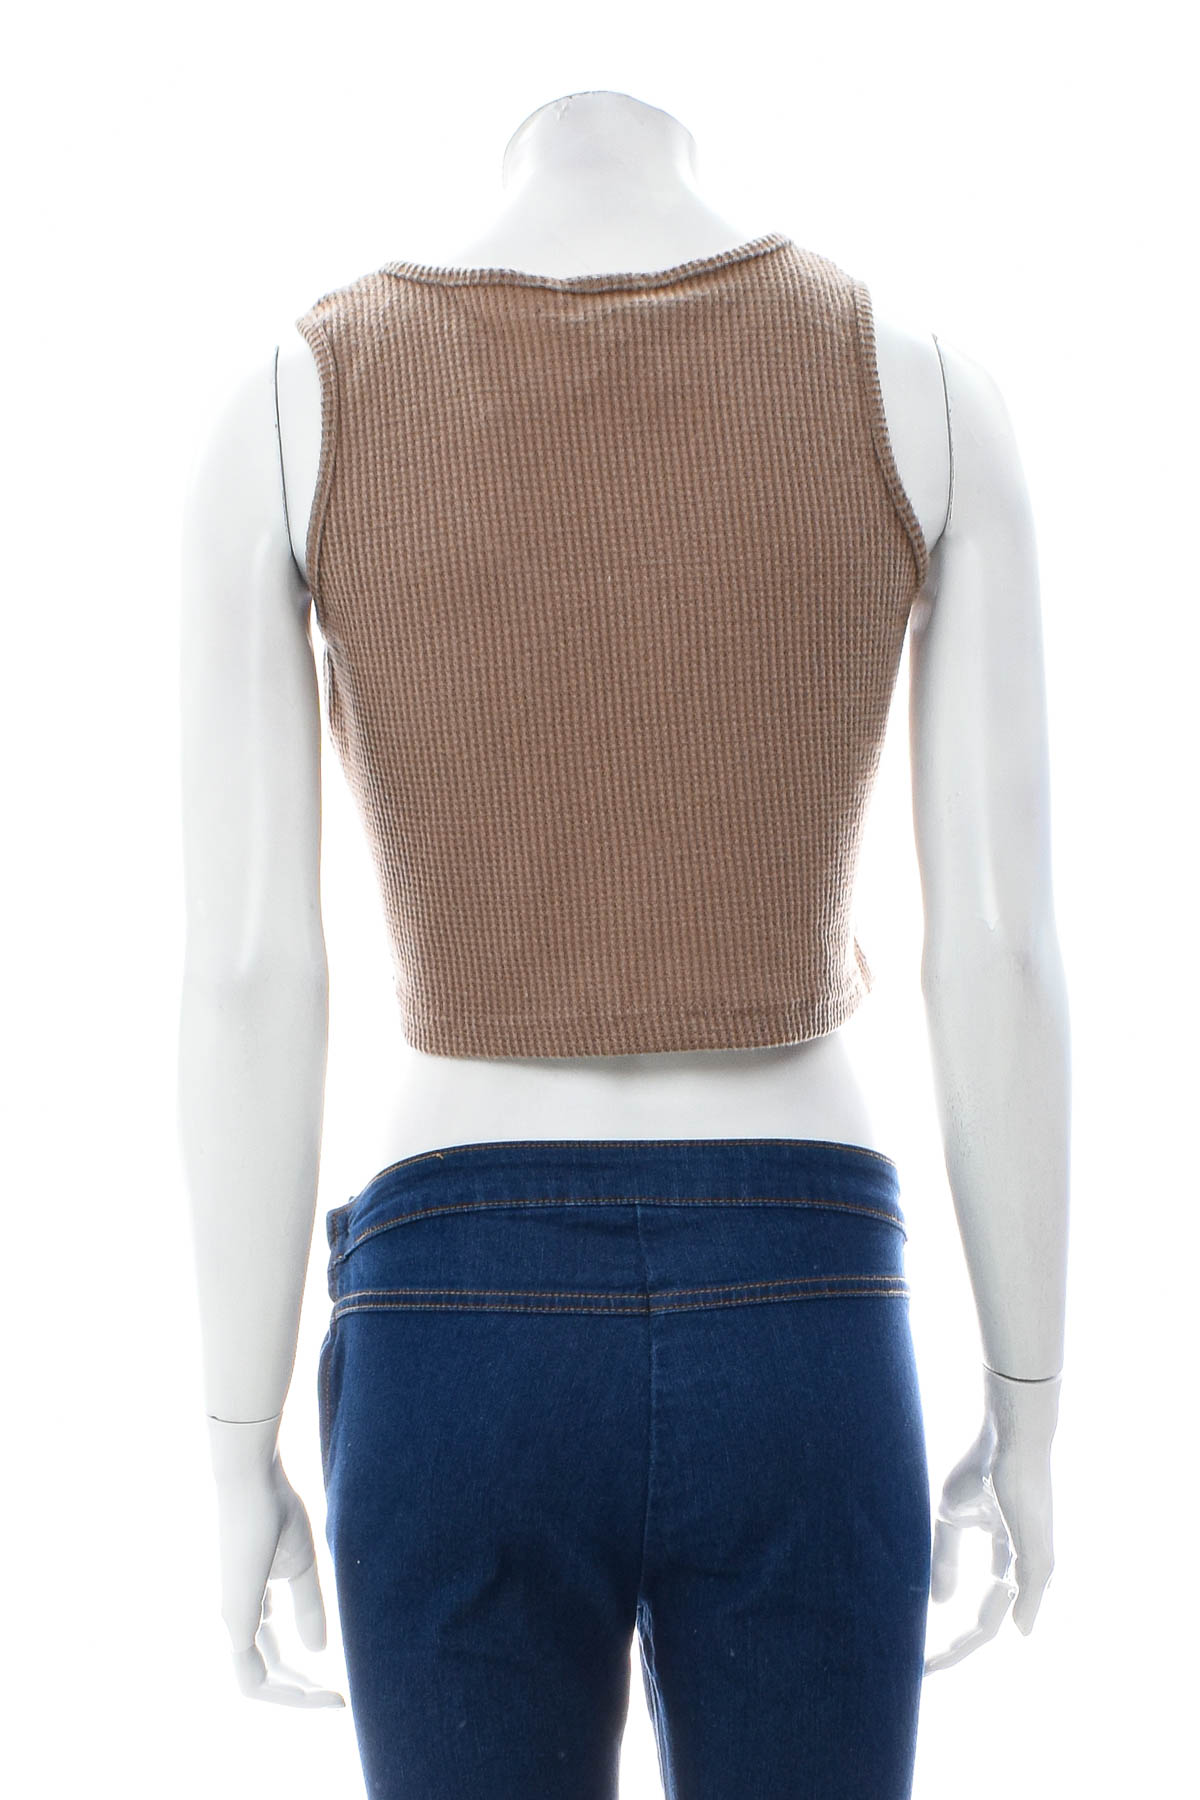 Women's sweater - Better / Together - 1